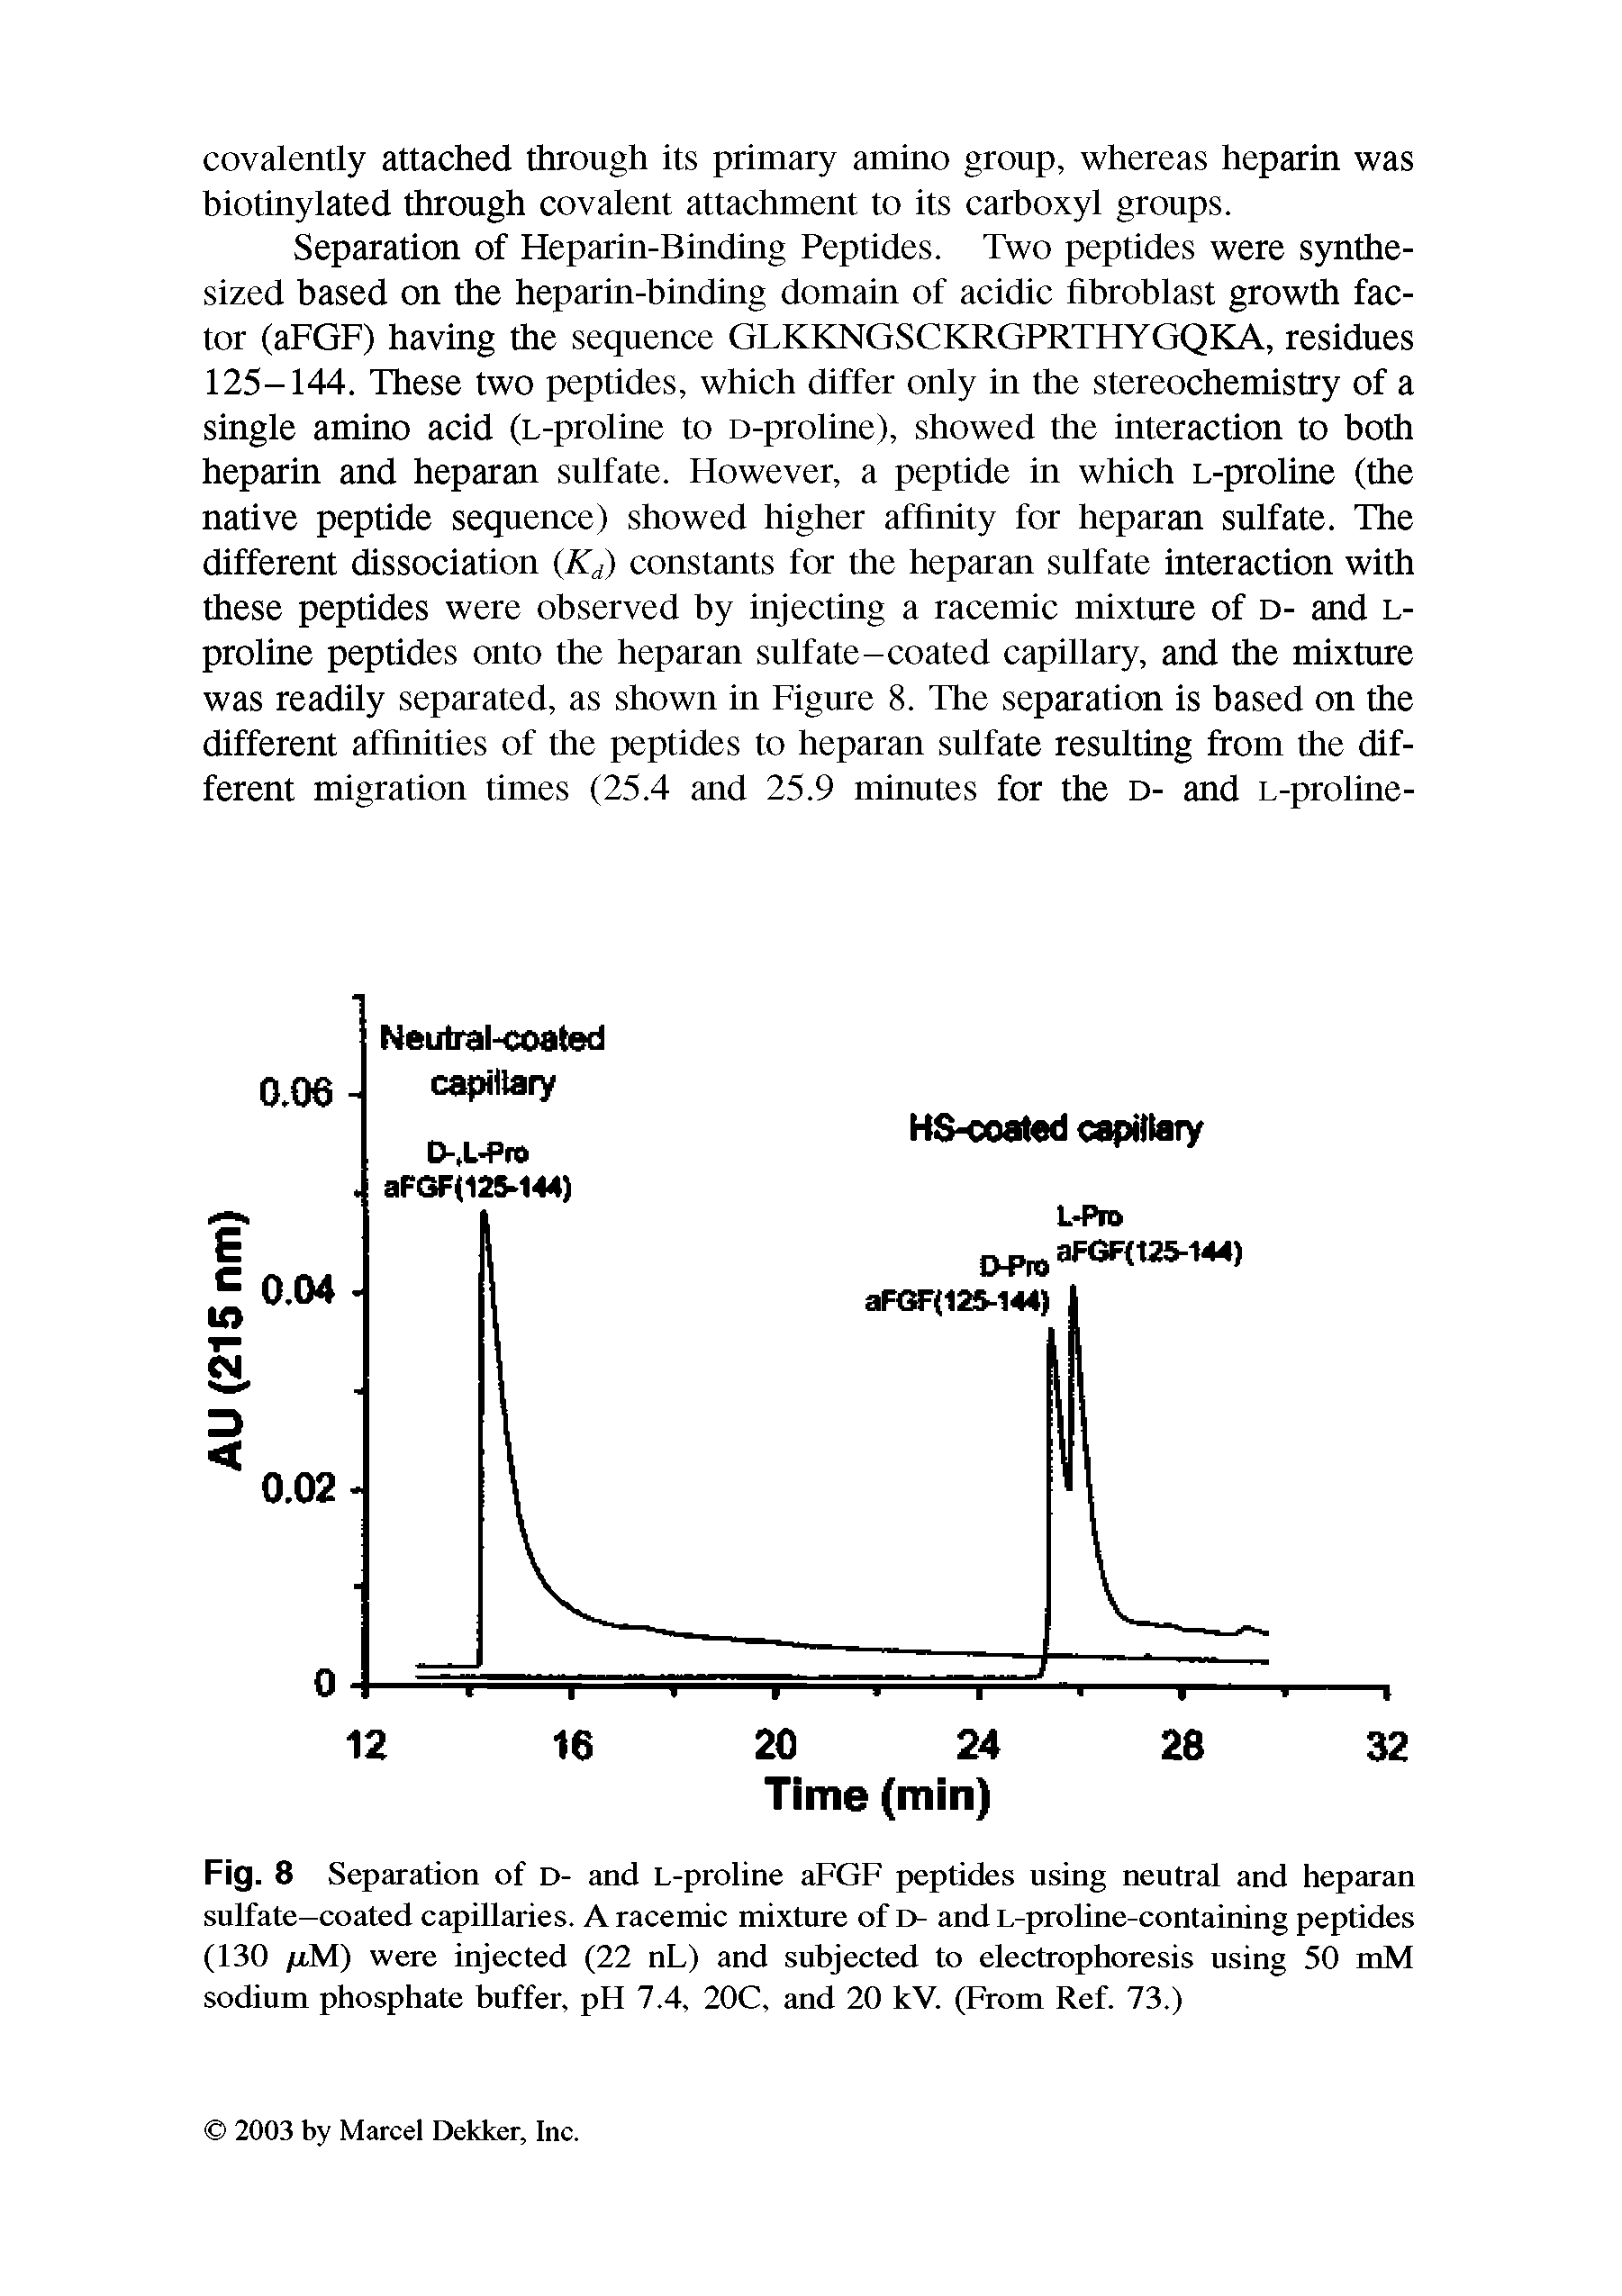 Fig. 8 Separation of D- and L-proline aFGF peptides using neutral and heparan sulfate-coated capillaries. A racemic mixture of D- and L-proline-containing peptides (130 /rM) were injected (22 nL) and subjected to electrophoresis using 50 mM sodium phosphate buffer, pH 7.4, 20C, and 20 kV. (From Ref. 73.)...